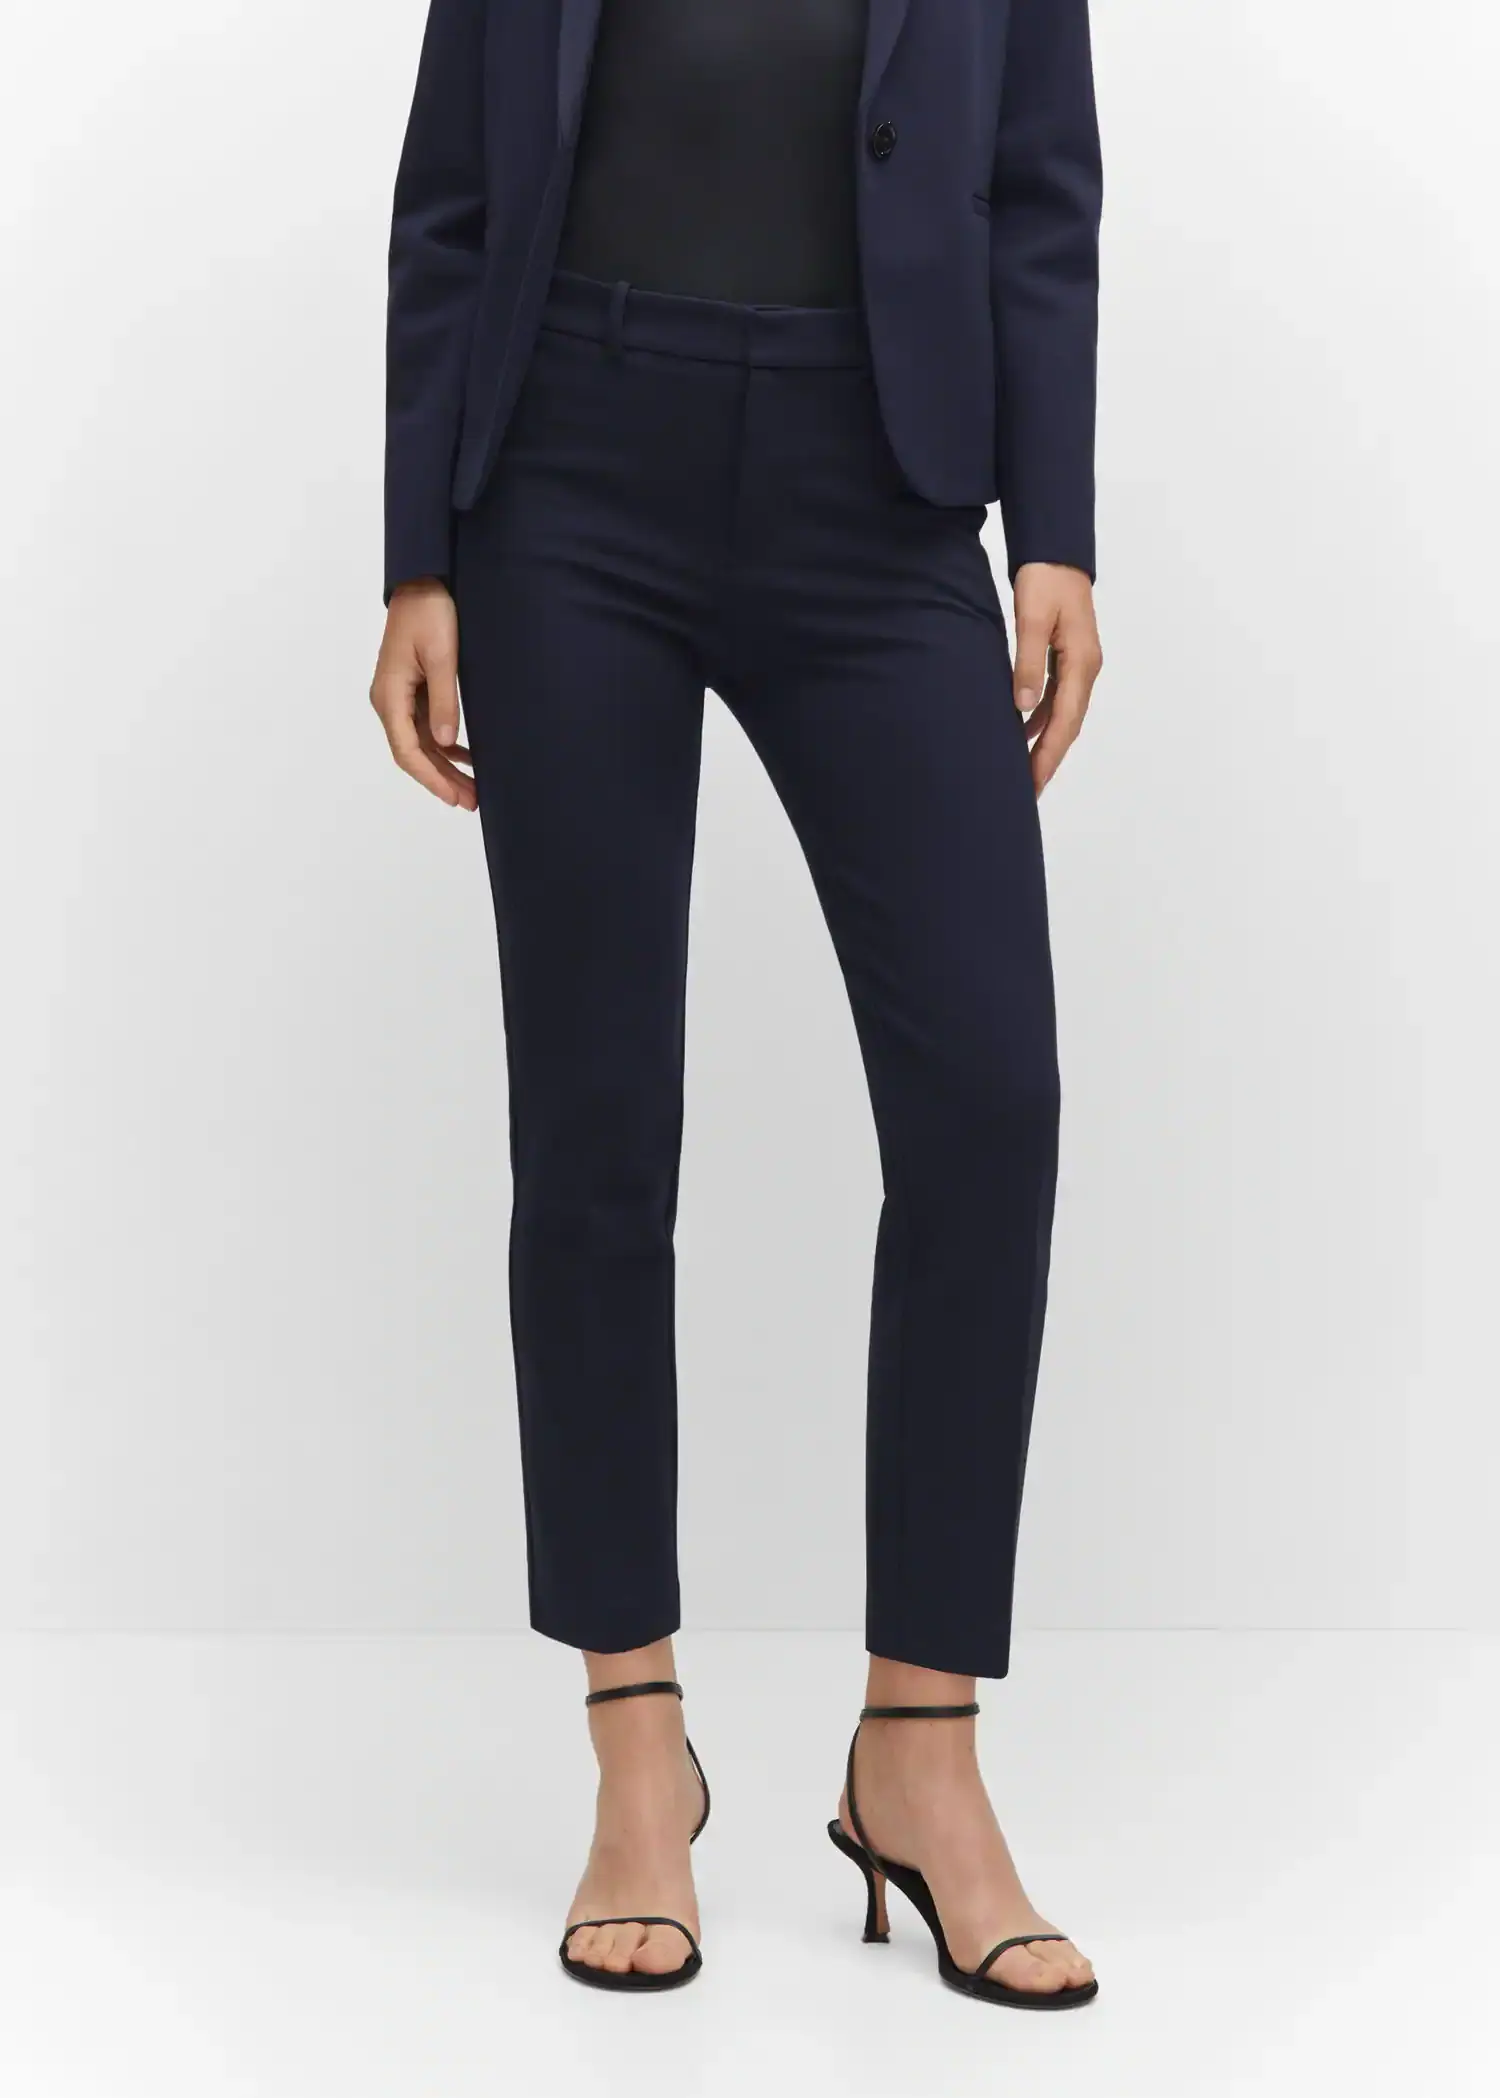 Mango Rome-knit straight trousers. a woman in a black suit and black heels. 